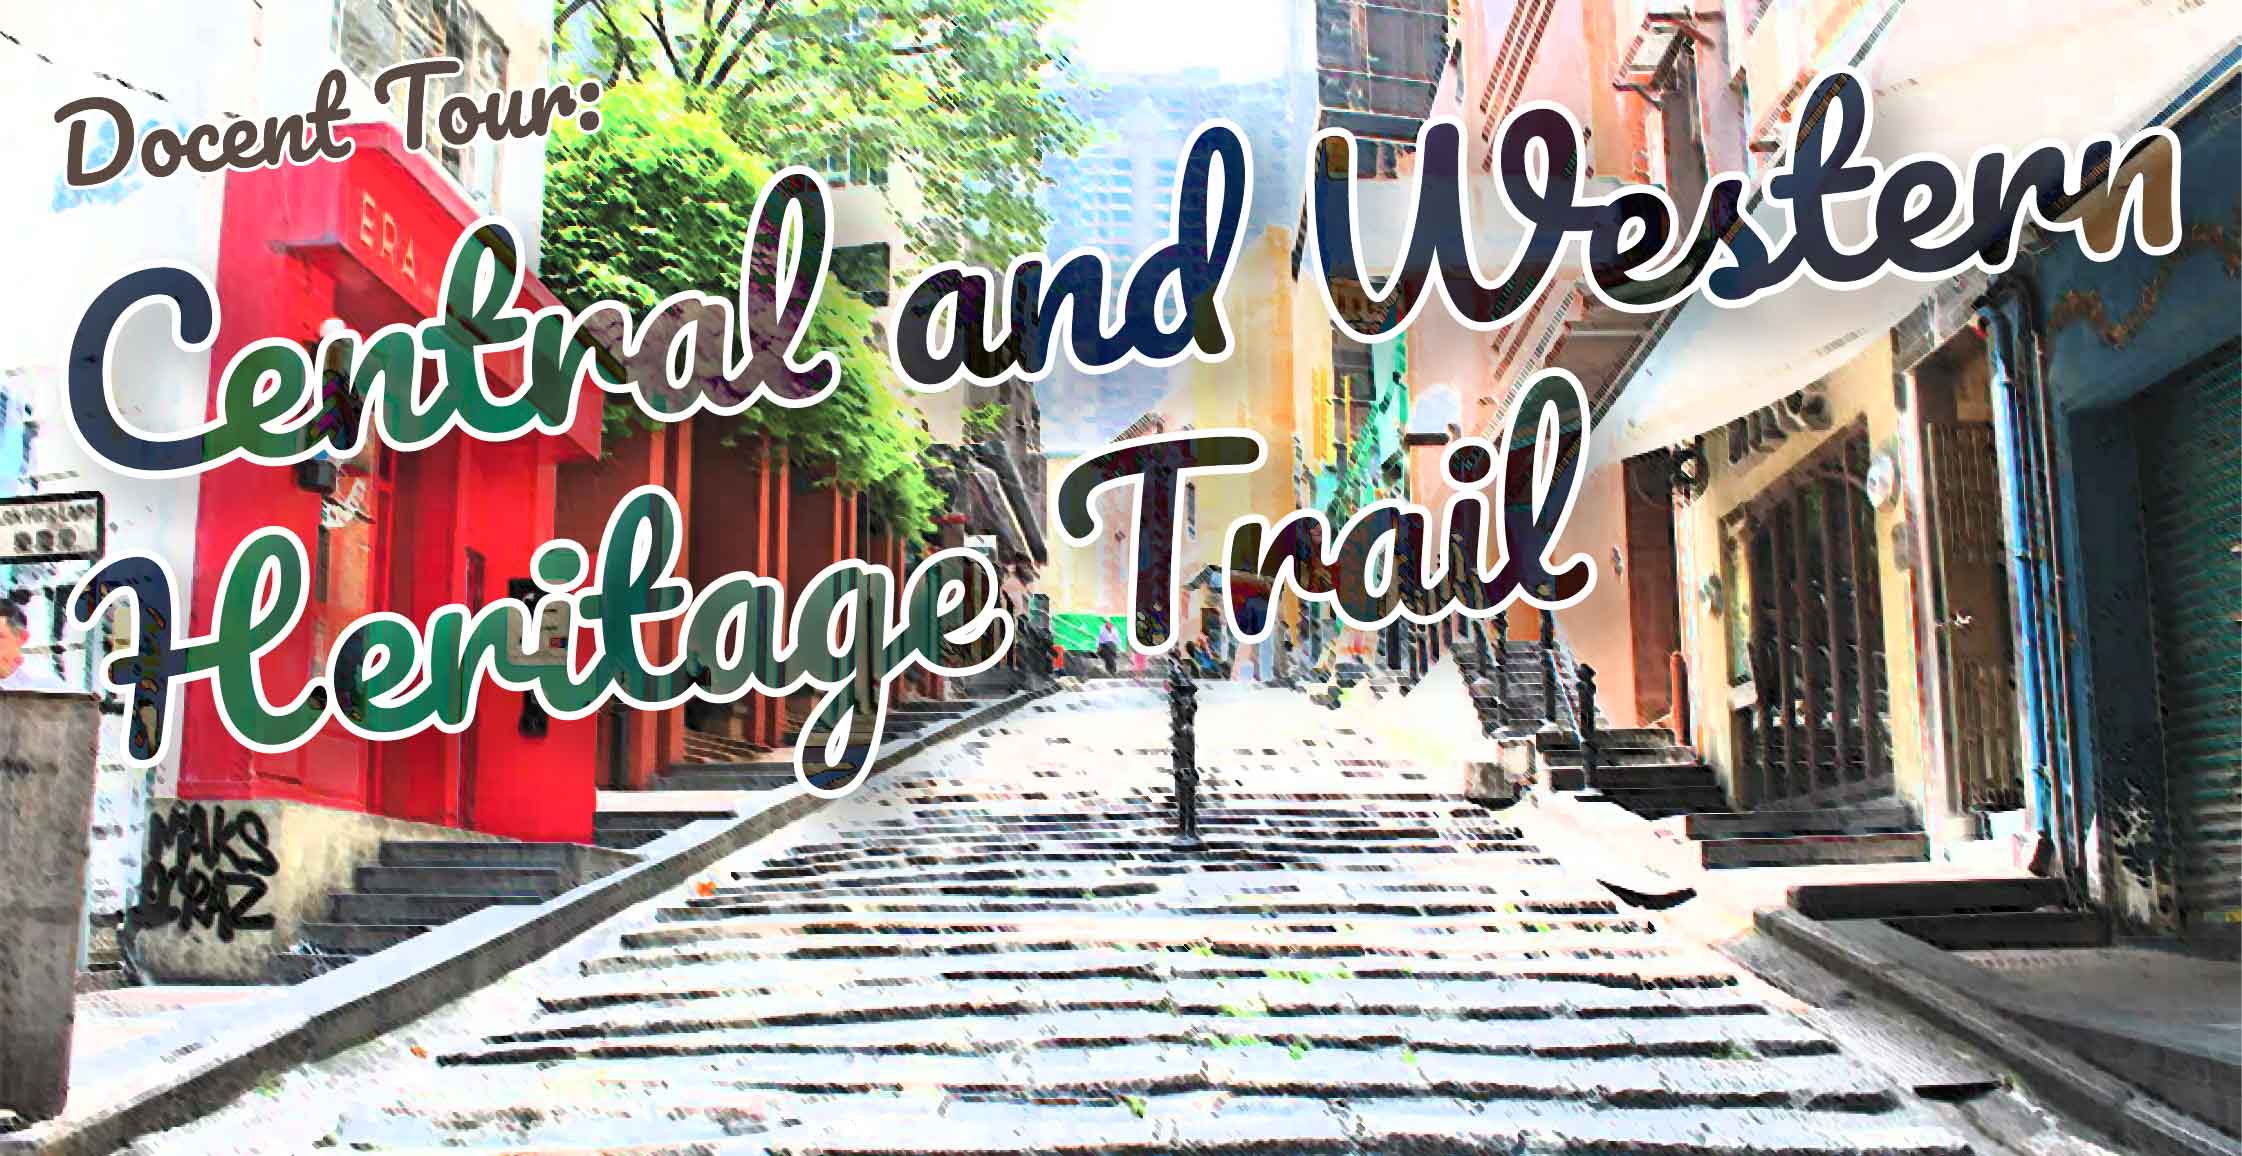 Central and Western Heritage Trail